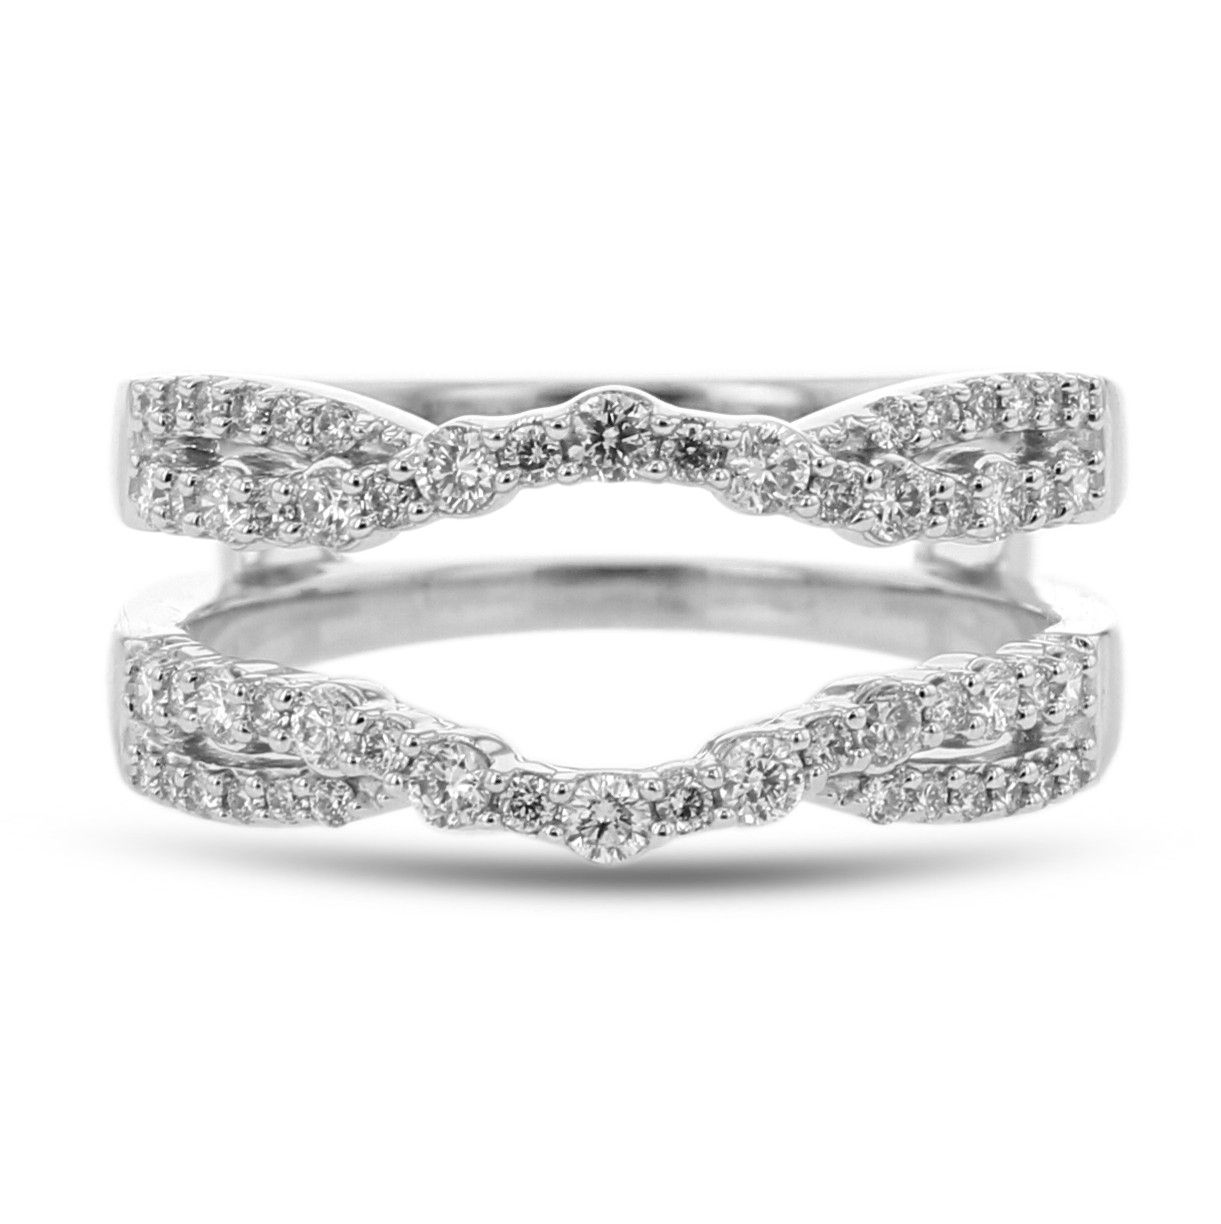 Diamond Cradle Wedding Band, Ring Enhancer, Curved Twist, 14k White Gold,   (View 6 of 25)